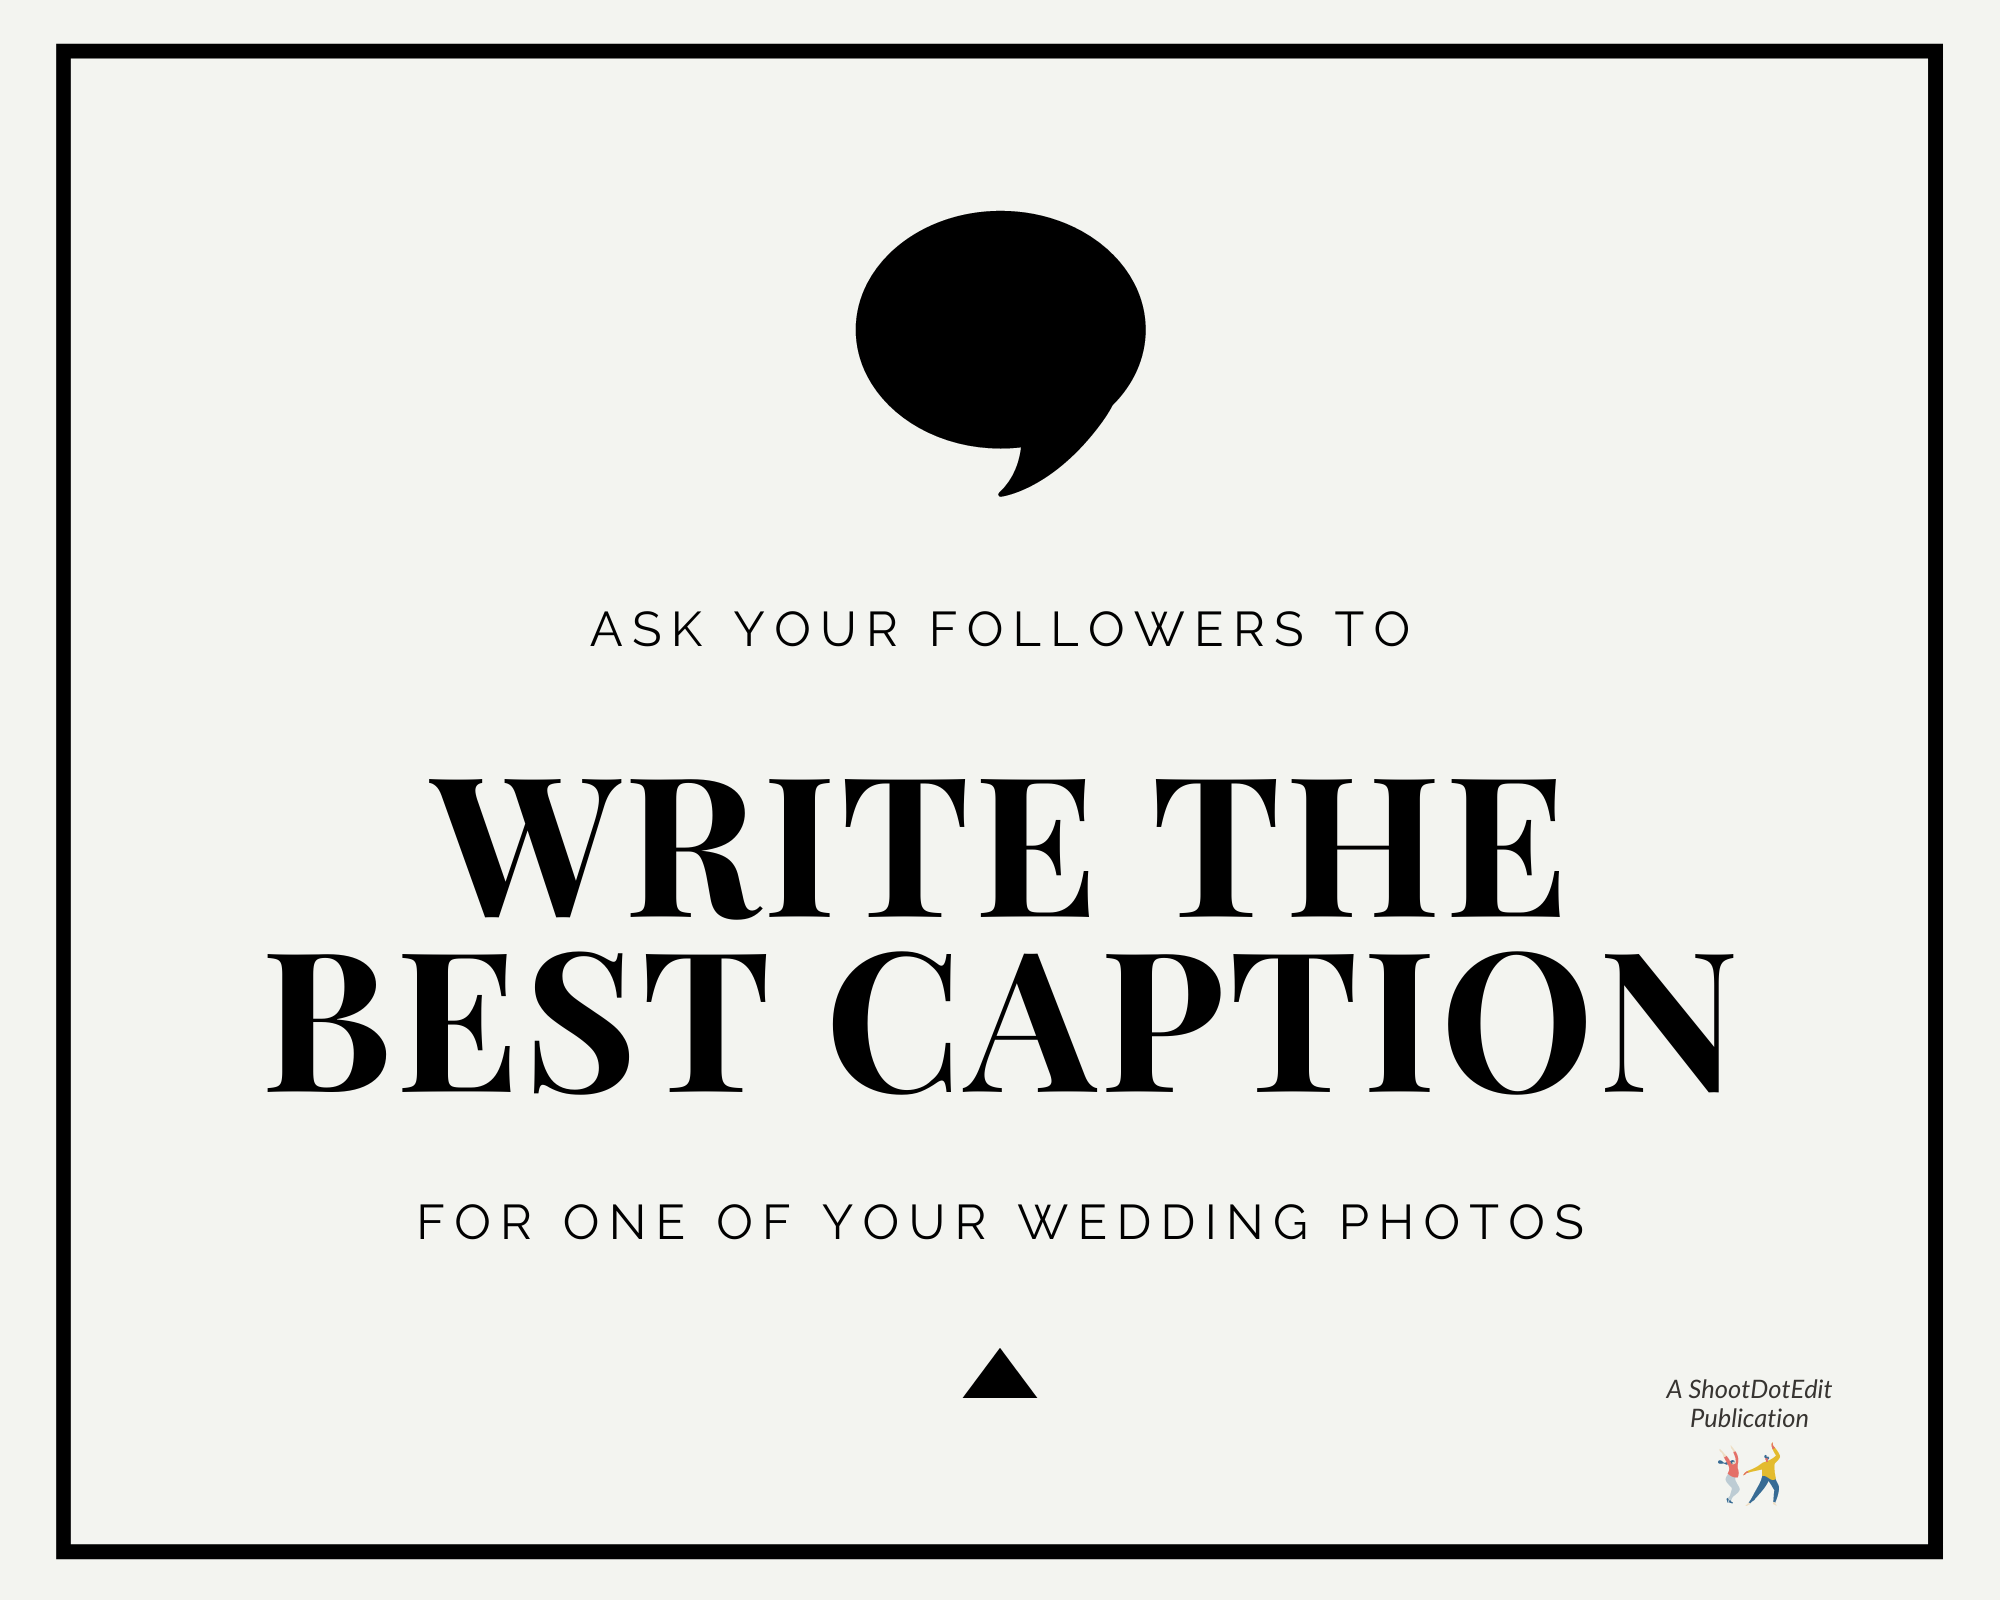 Infographic stating ask your followers to write the best caption for one of your wedding photos